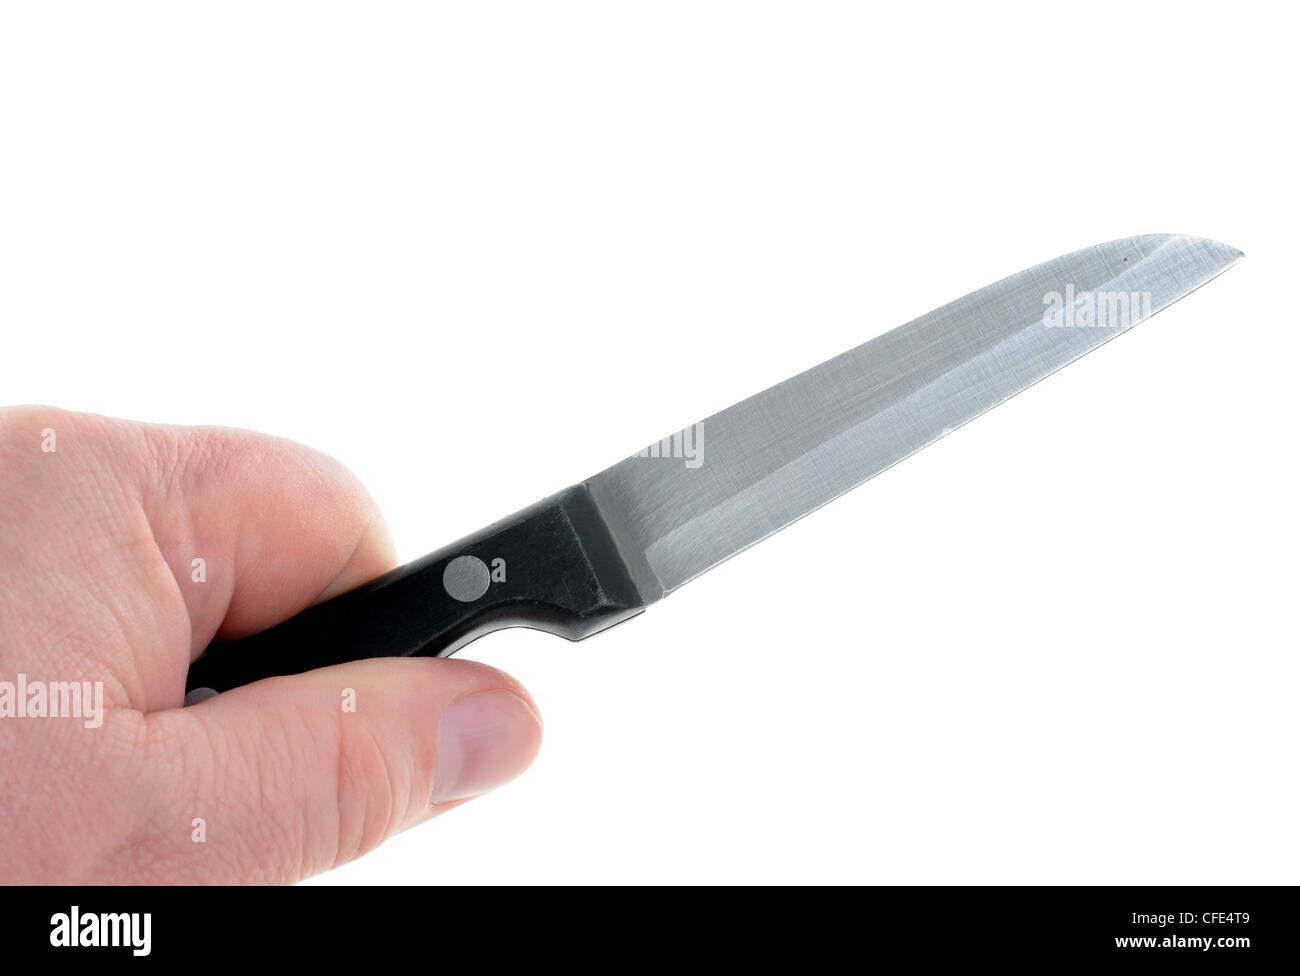 Knife as symbol for a criminal act Stock Photo